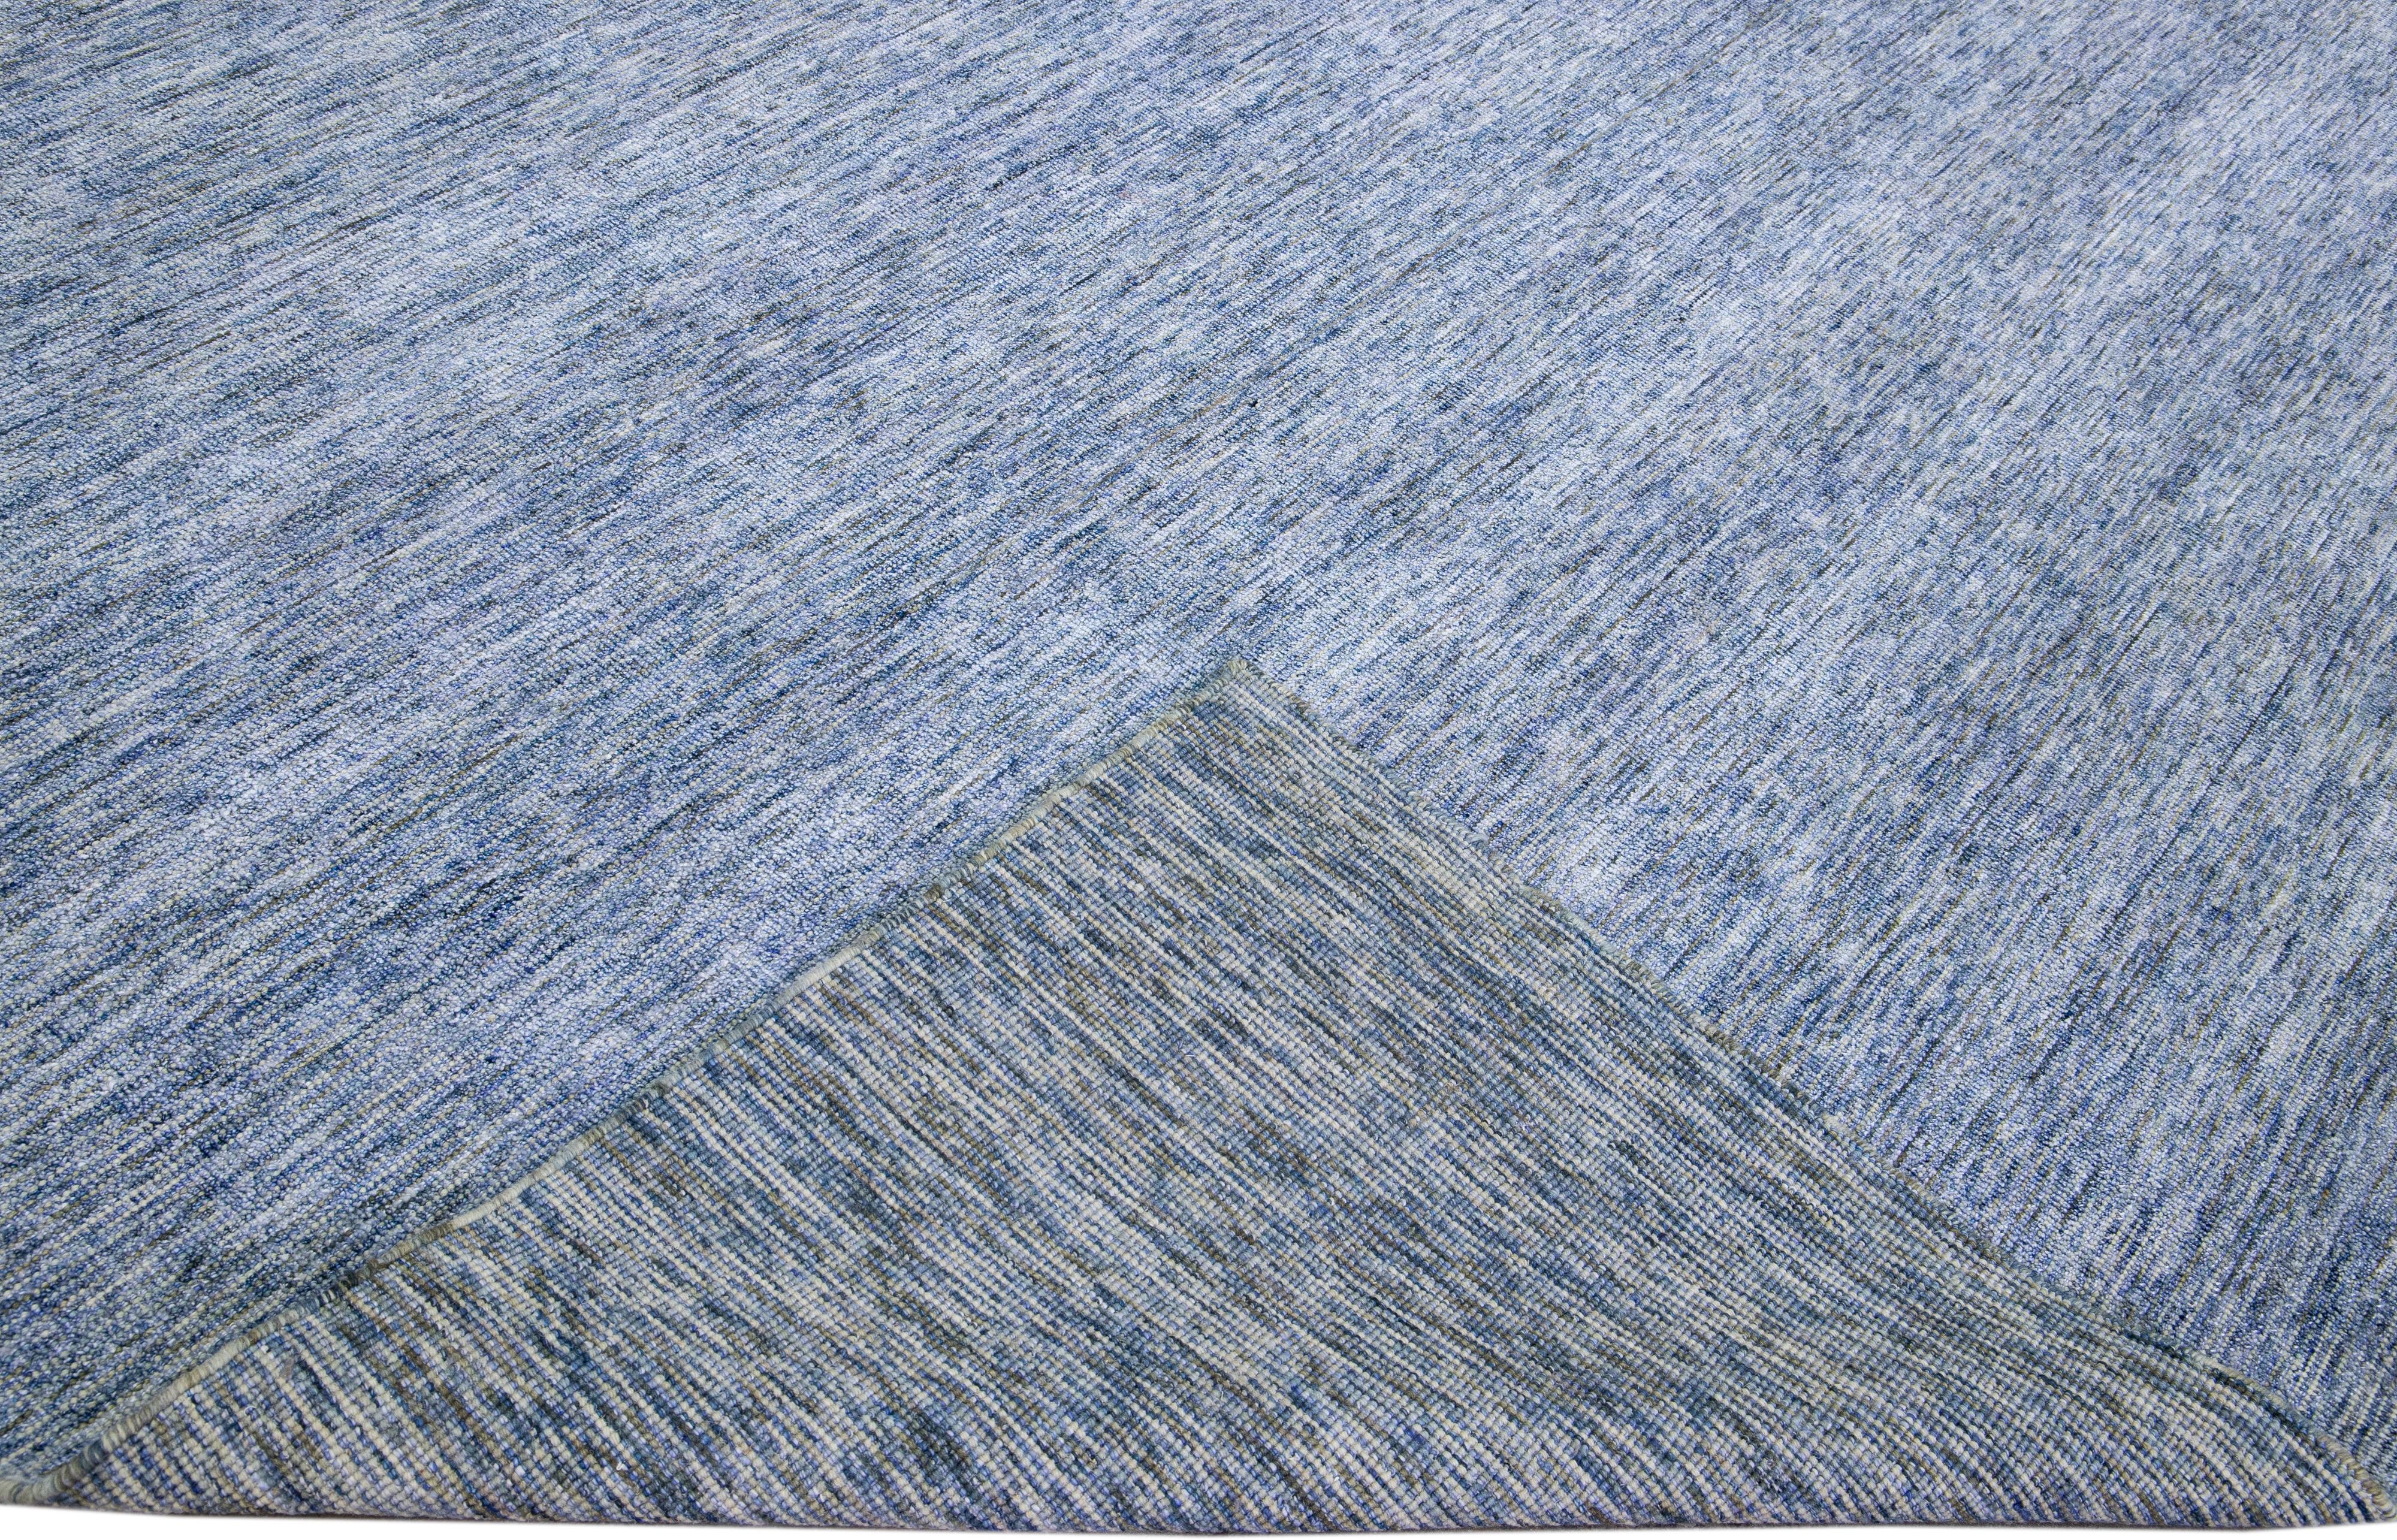 Beautiful Apadanas's handmade bamboo & silk Indian groove rug with the blue field. This groove collection rug has an all-over solid design.

This rug measures: 12' x 15'.

Custom colors and sizes are available upon request.

